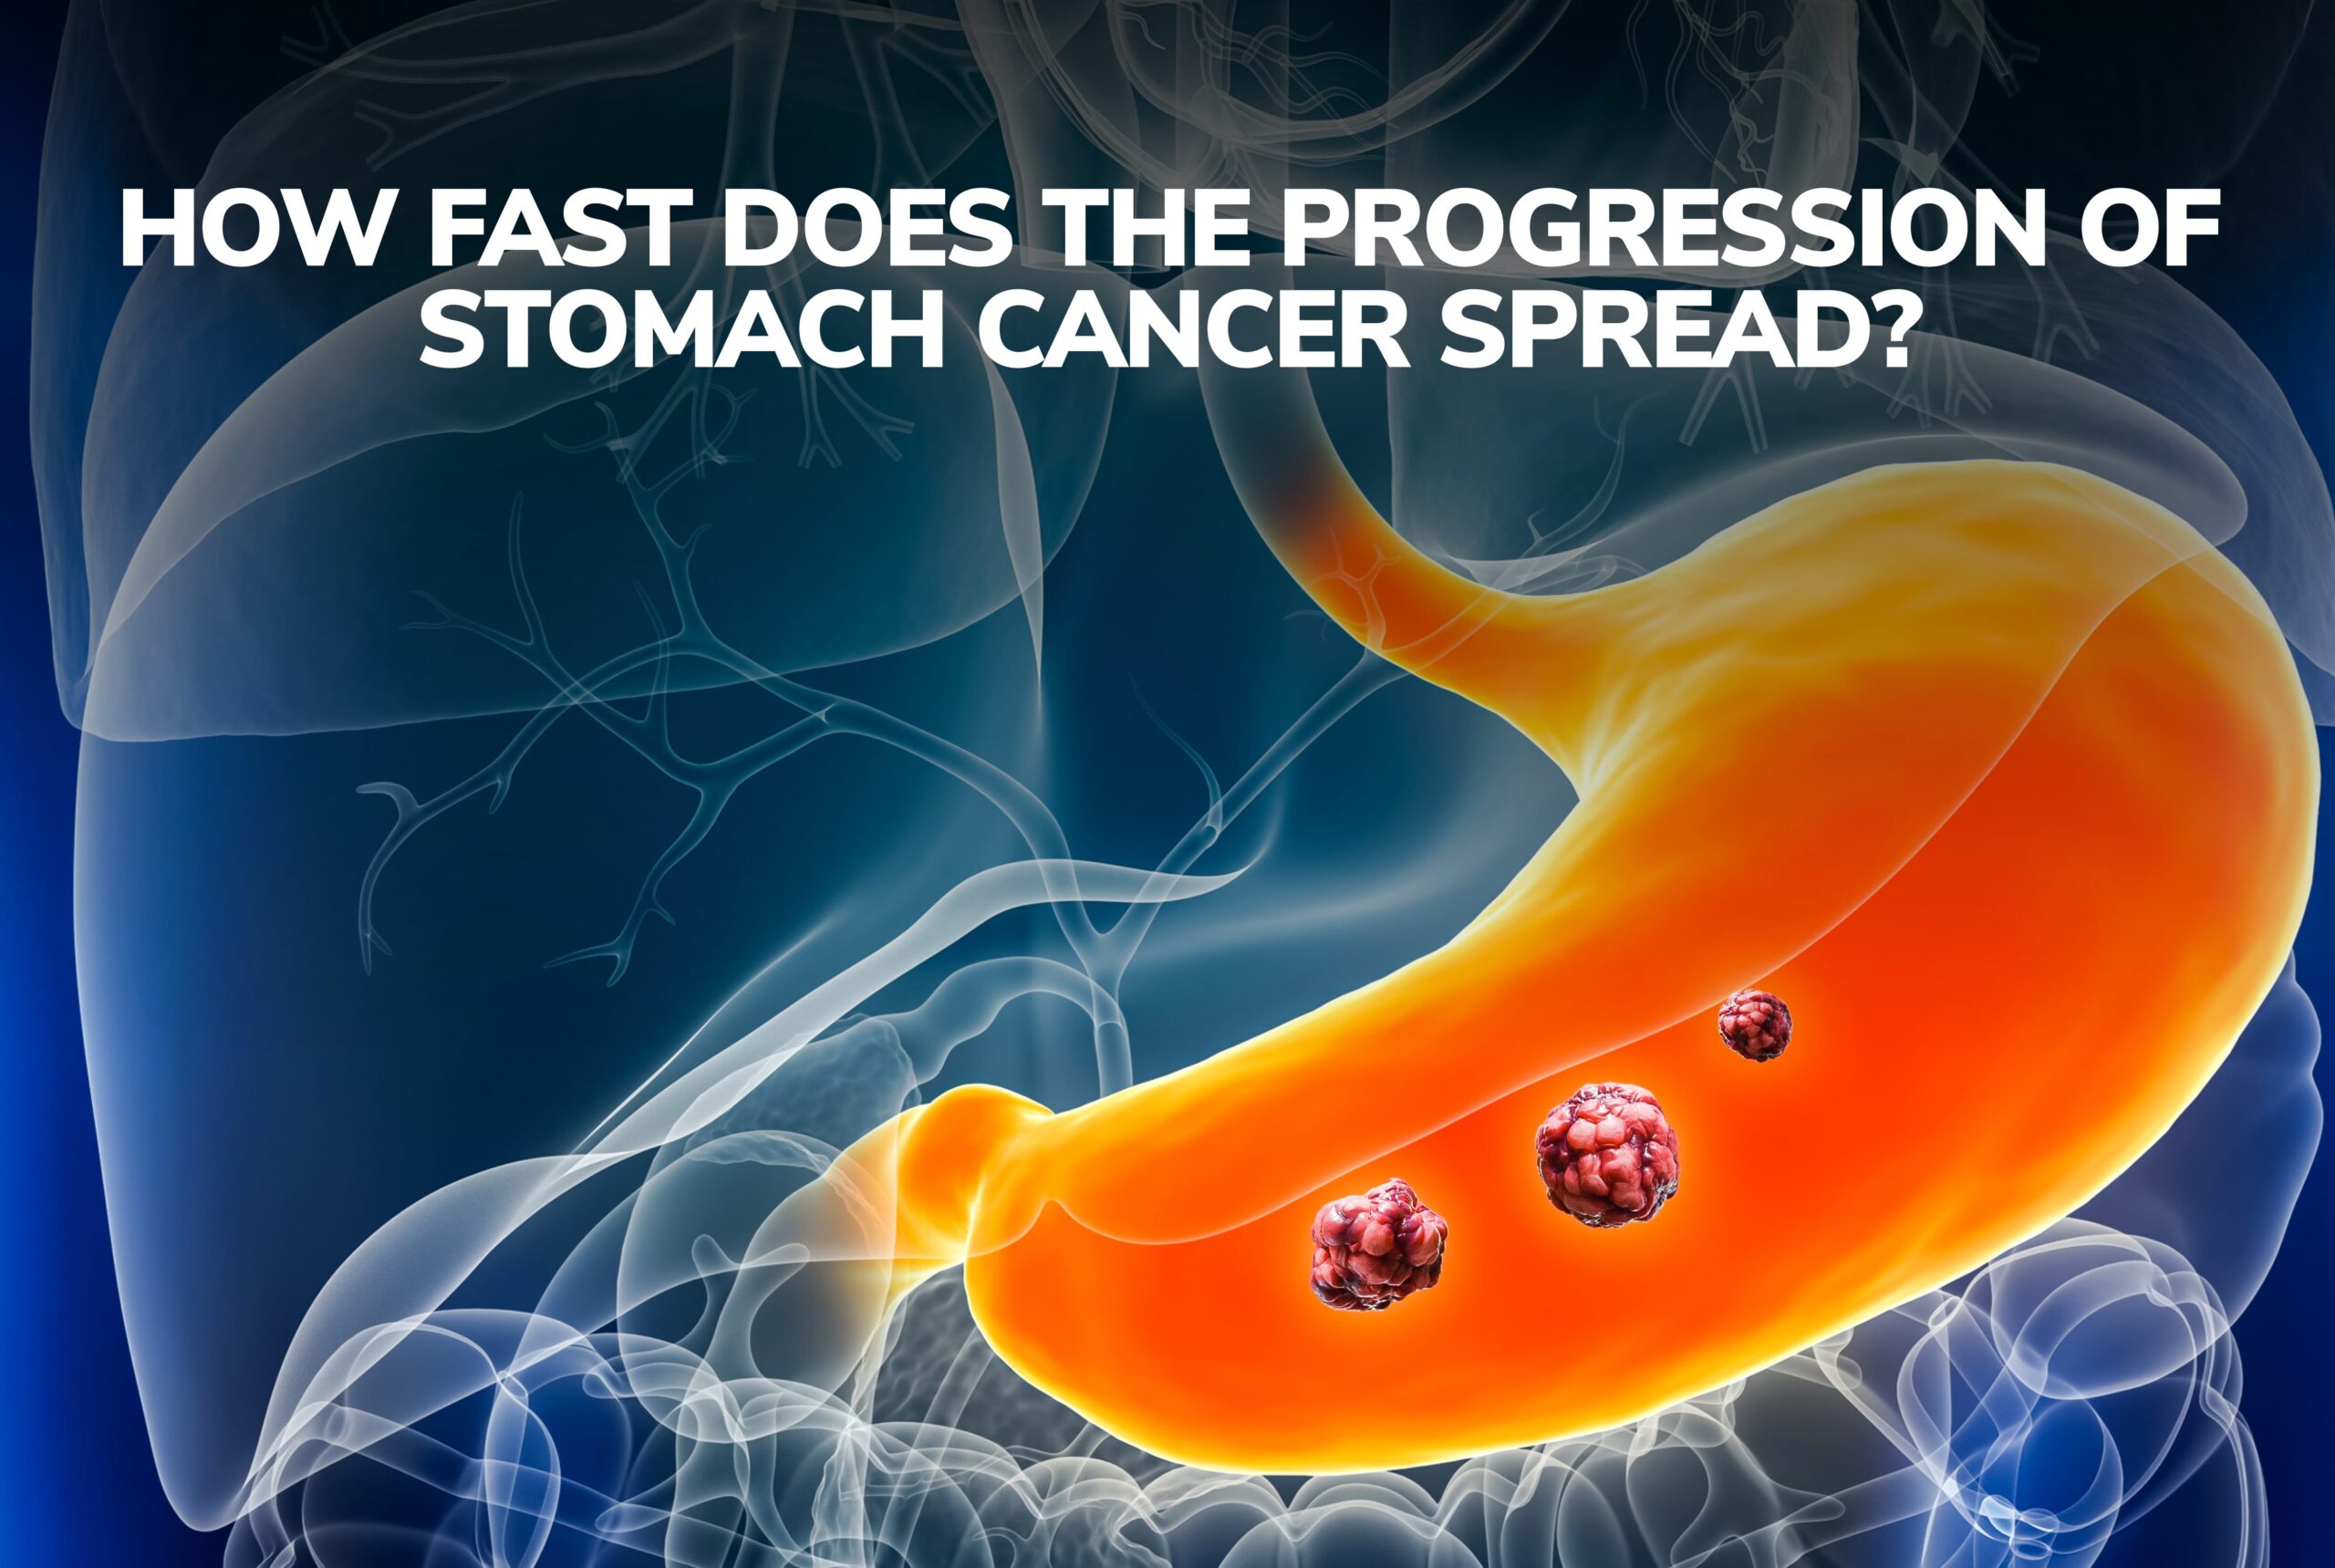 How Fast Does The Progression of Stomach Cancer Spread?